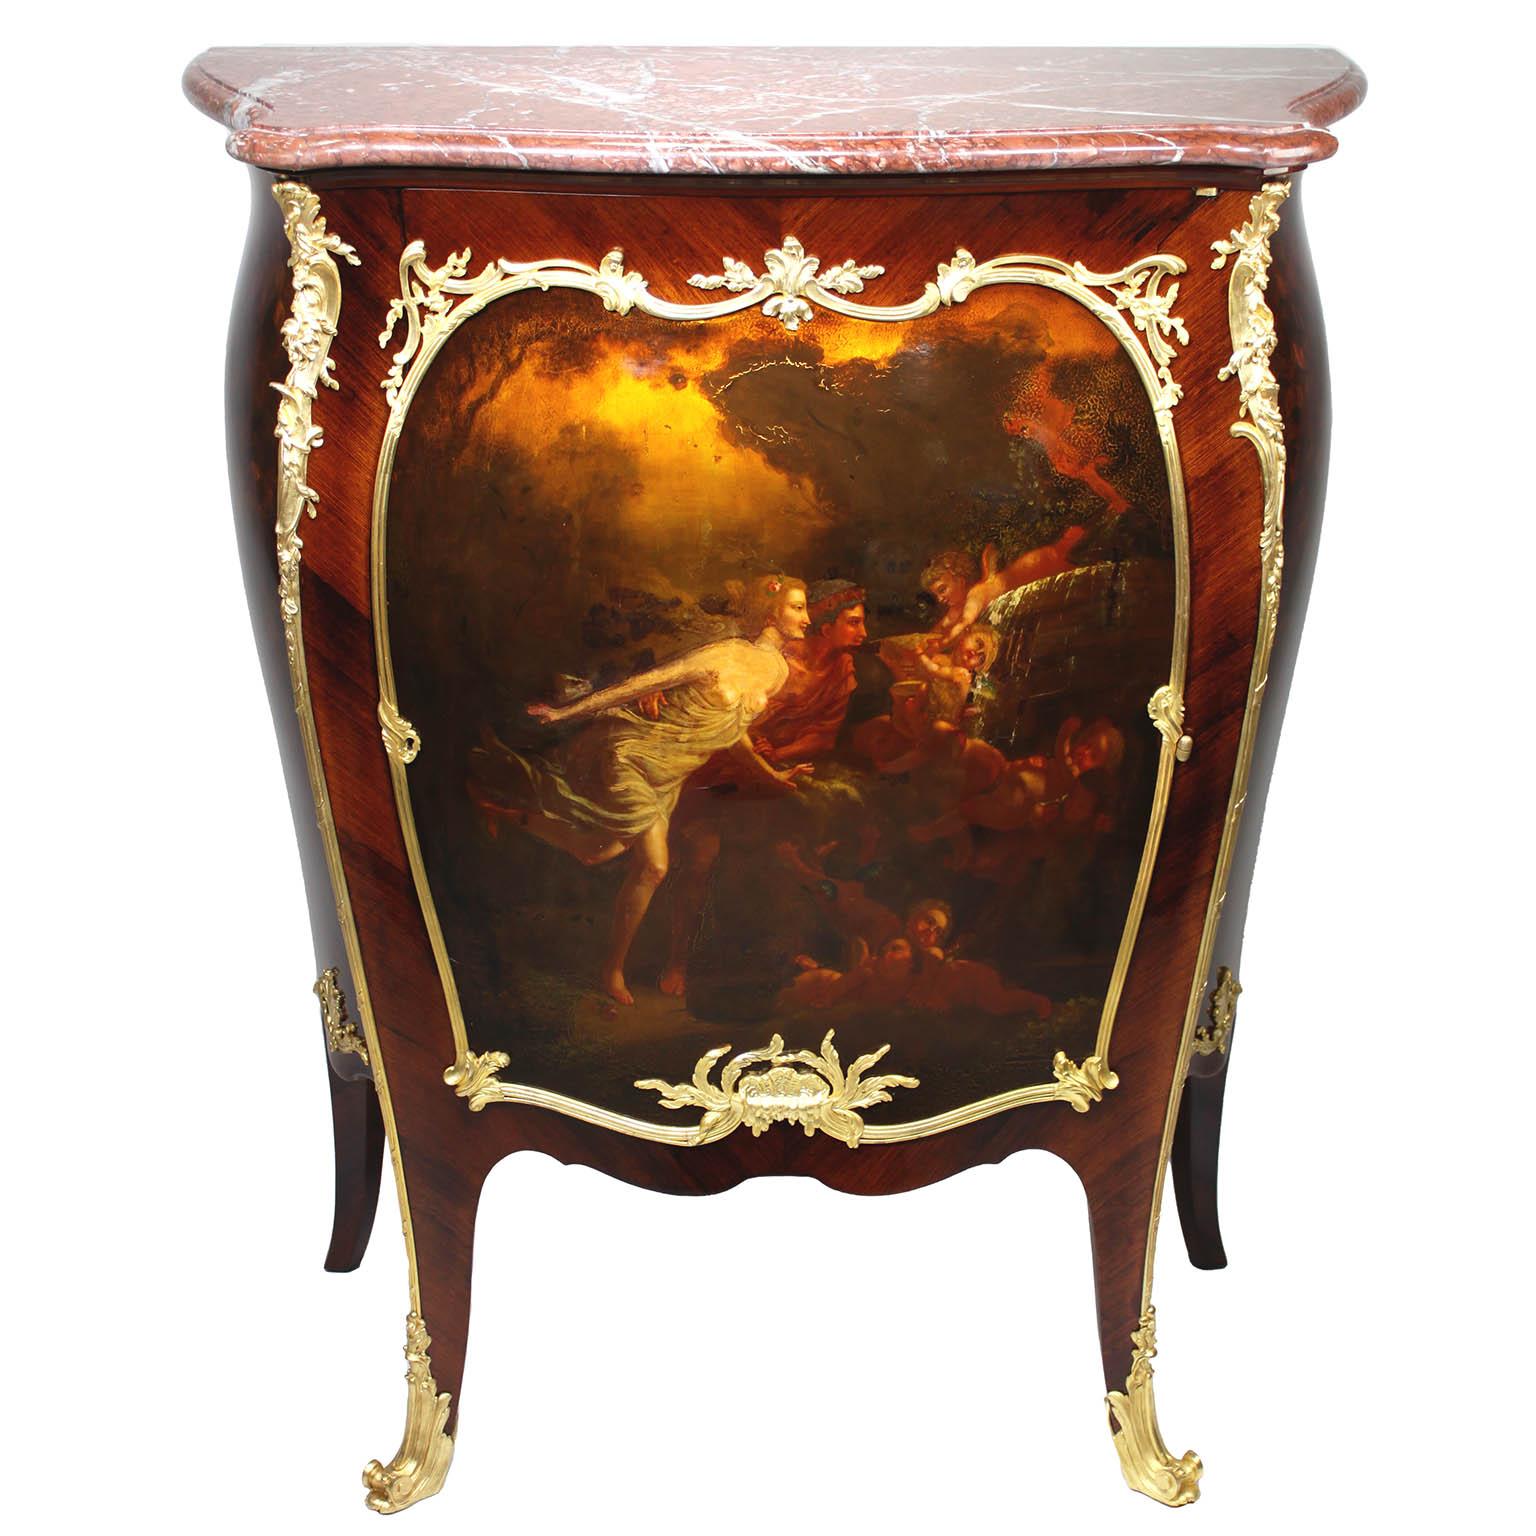 A Very Fine French 19th century Louis XV Style Ormolu-Mounted Kingwood and Satinwood Parquetry Vernis Martin Decorated Meuble D'Appui Side-Cabinet by François Linke (1855-1946) - Index Number 204 - Paris. The serpentine Griotte de Campan Rouge